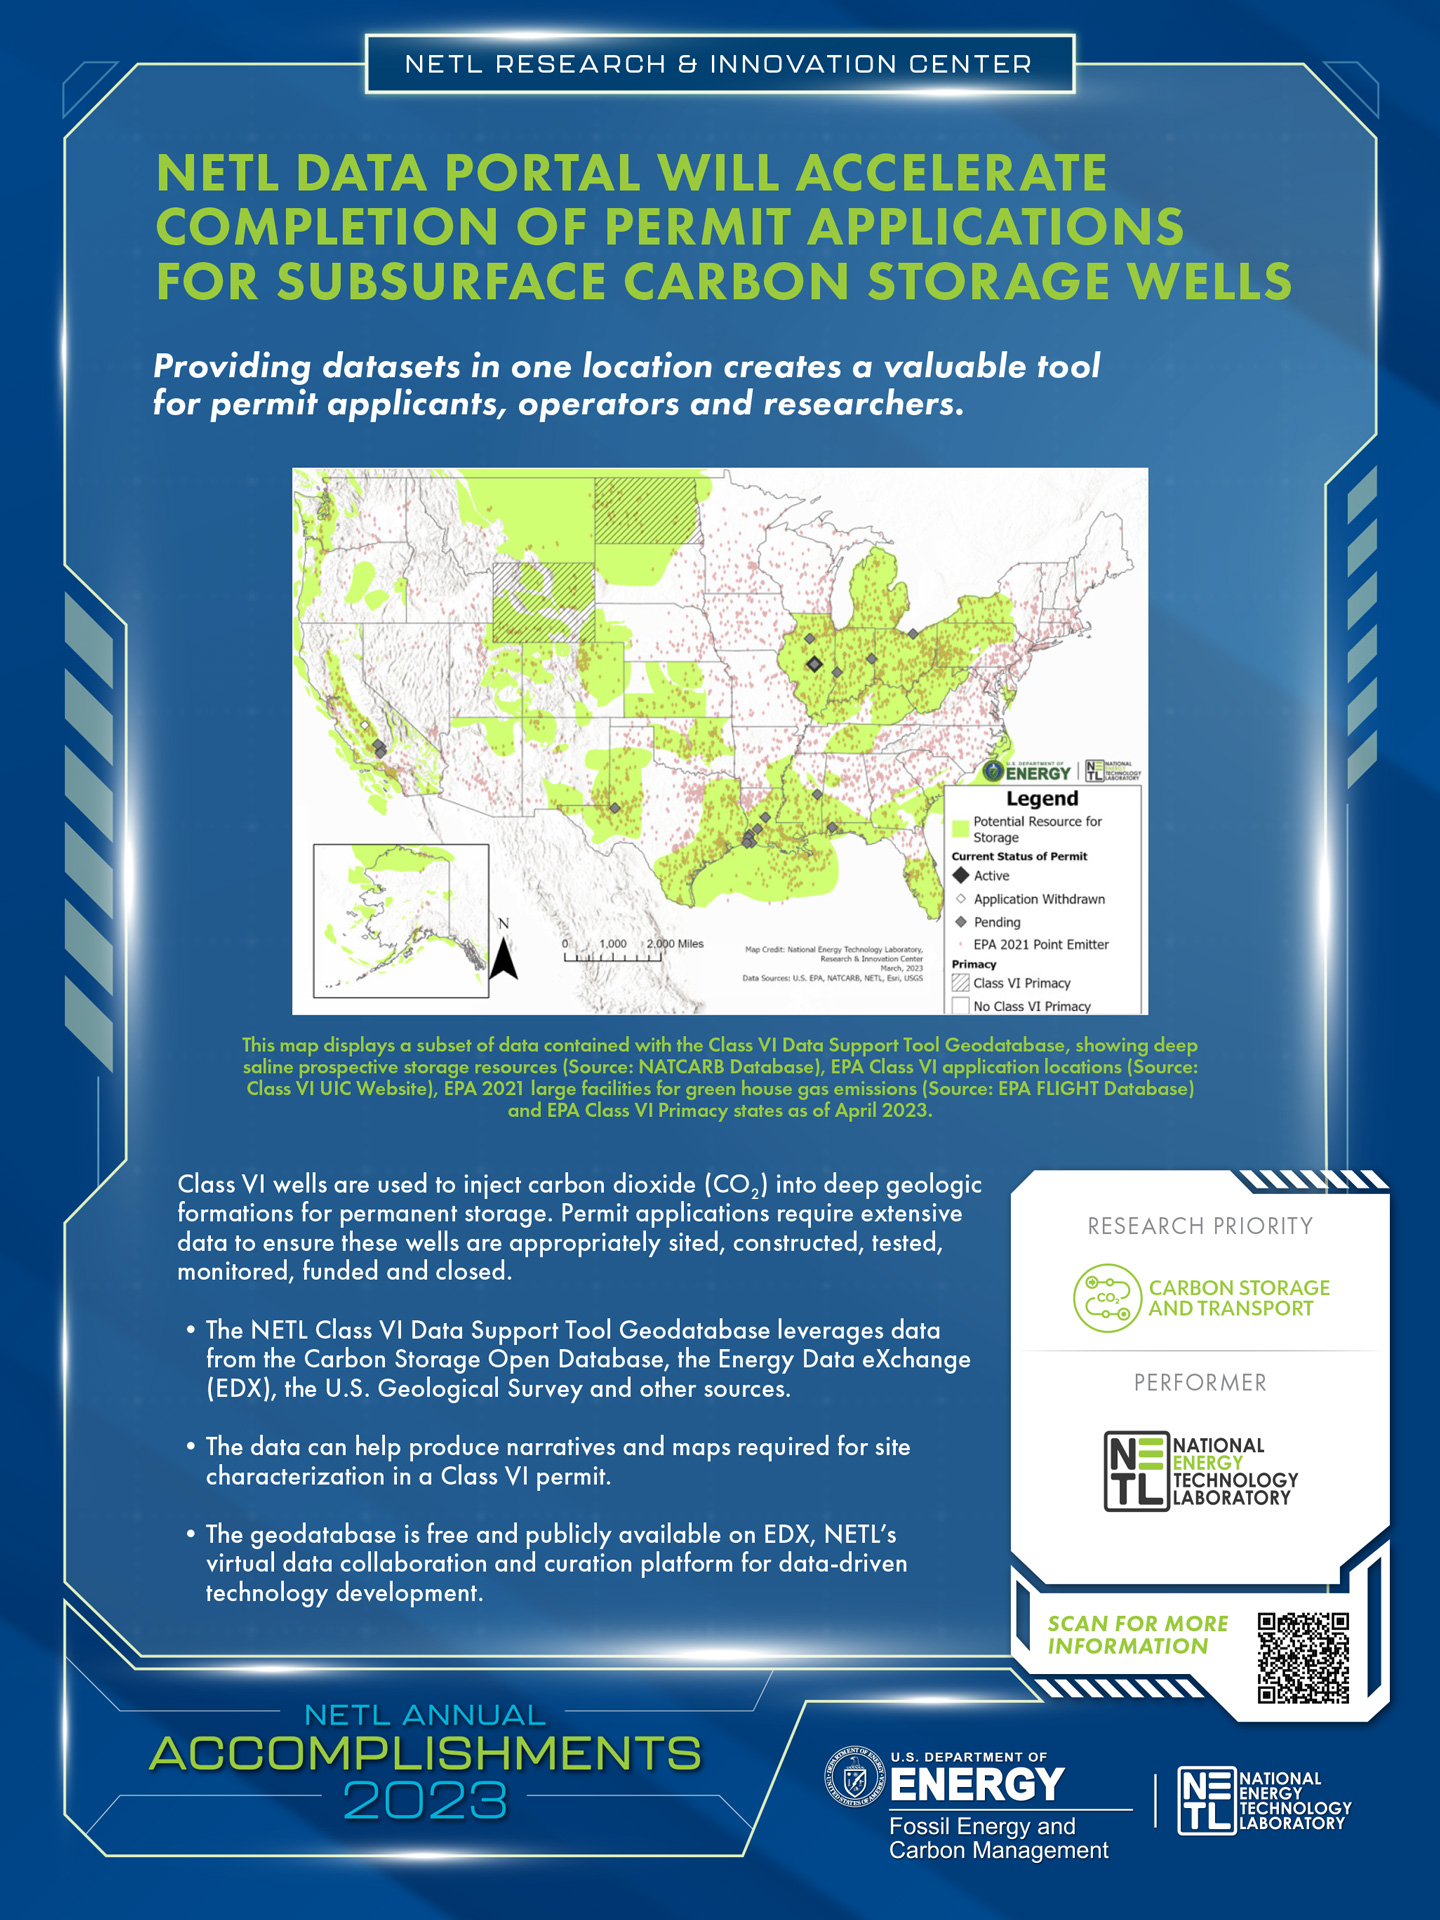 NETL Data Portal Will Accelerate Completion of Permit Applications for Subsurface Carbon Storage Wells